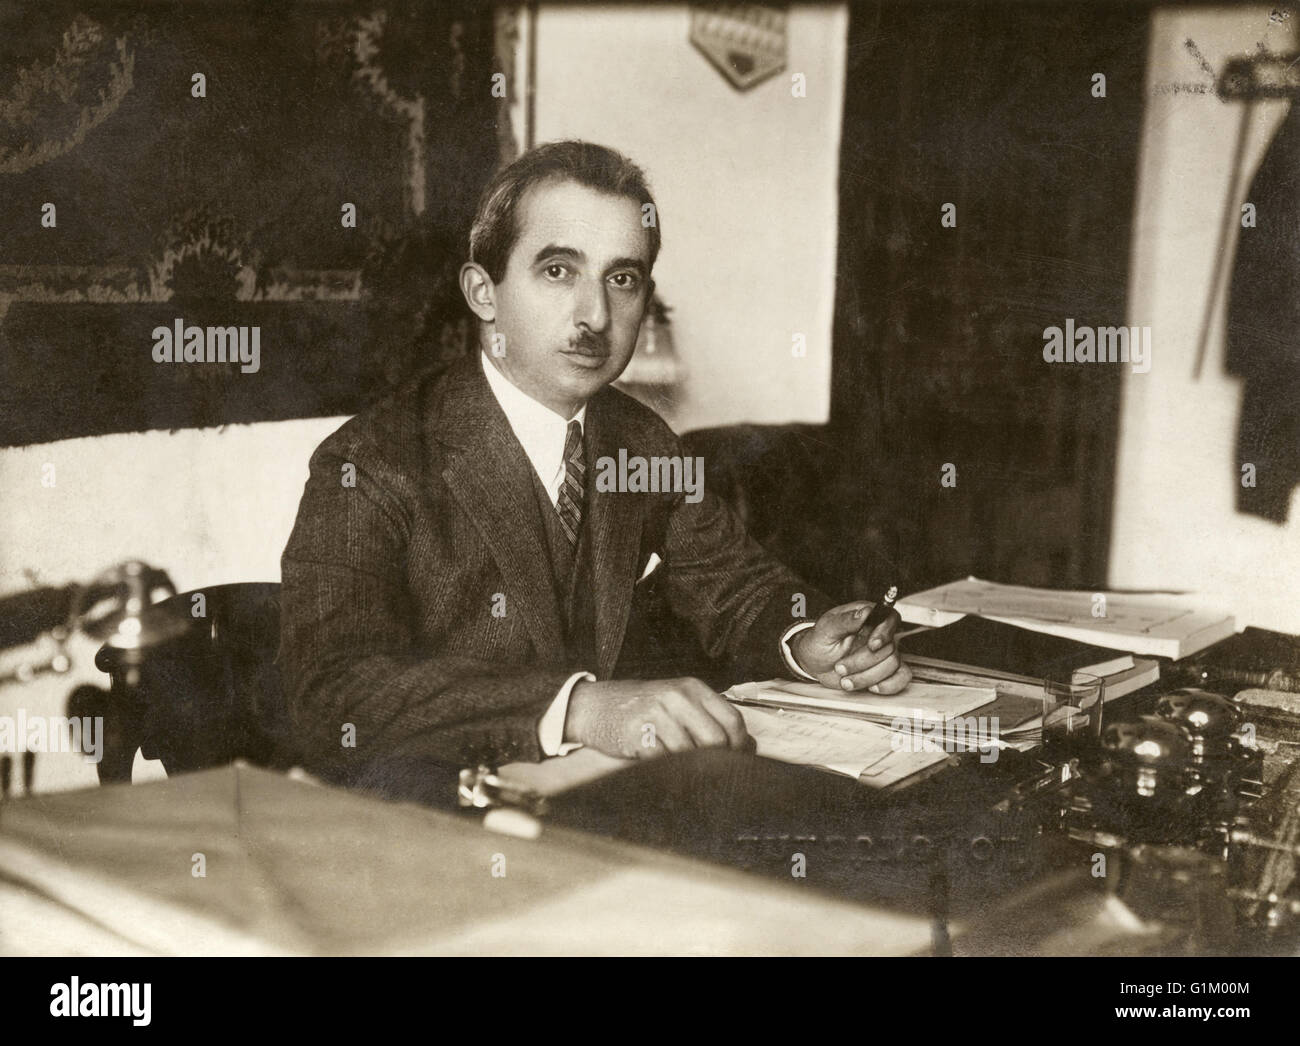 ISMET INÖNÜ (1884-1973).  Also known as Ismet Pasha. Turkish politician, President of Turkey, 1938-1950. Photographed during his tenure as Prime Minister, 1928. Stock Photo